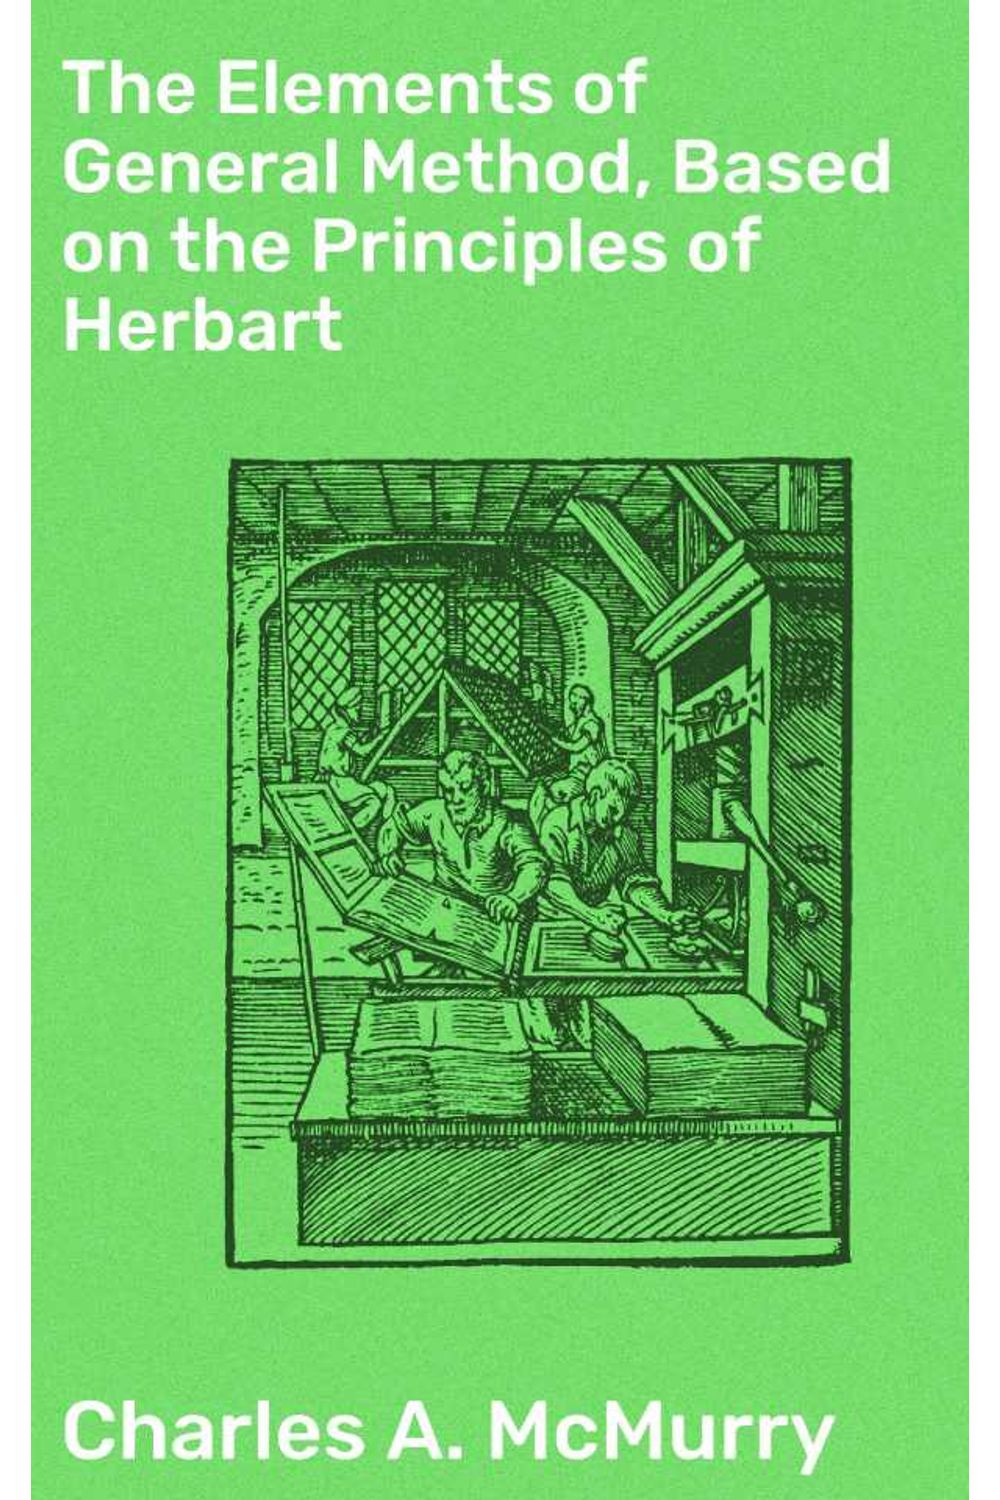 bw-the-elements-of-general-method-based-on-the-principles-of-herbart-good-press-4064066178543